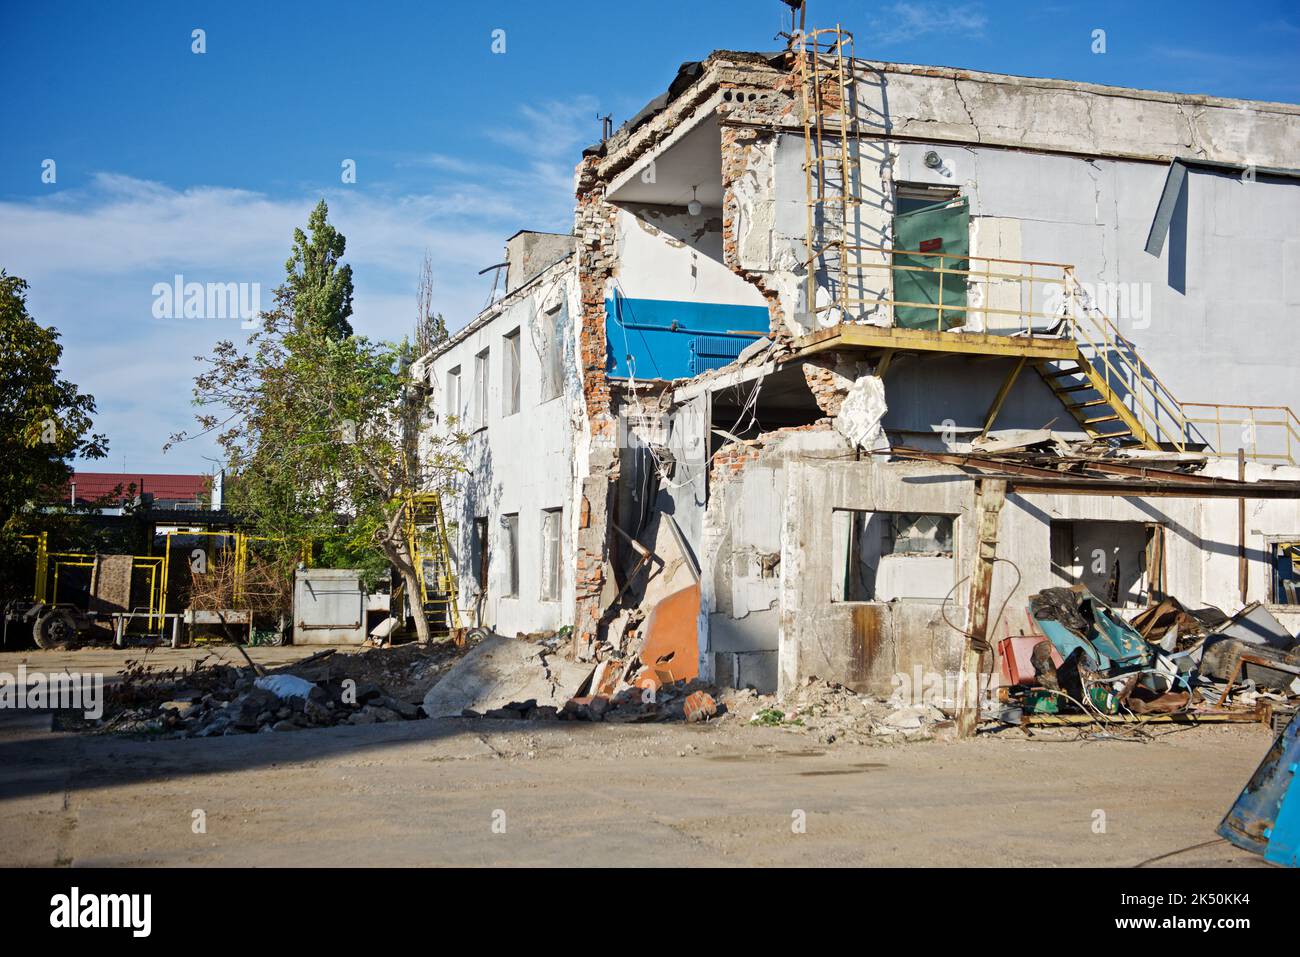 the consequences of Russian rocket attacks on the city of Mykolaiv, Ukraine Stock Photo